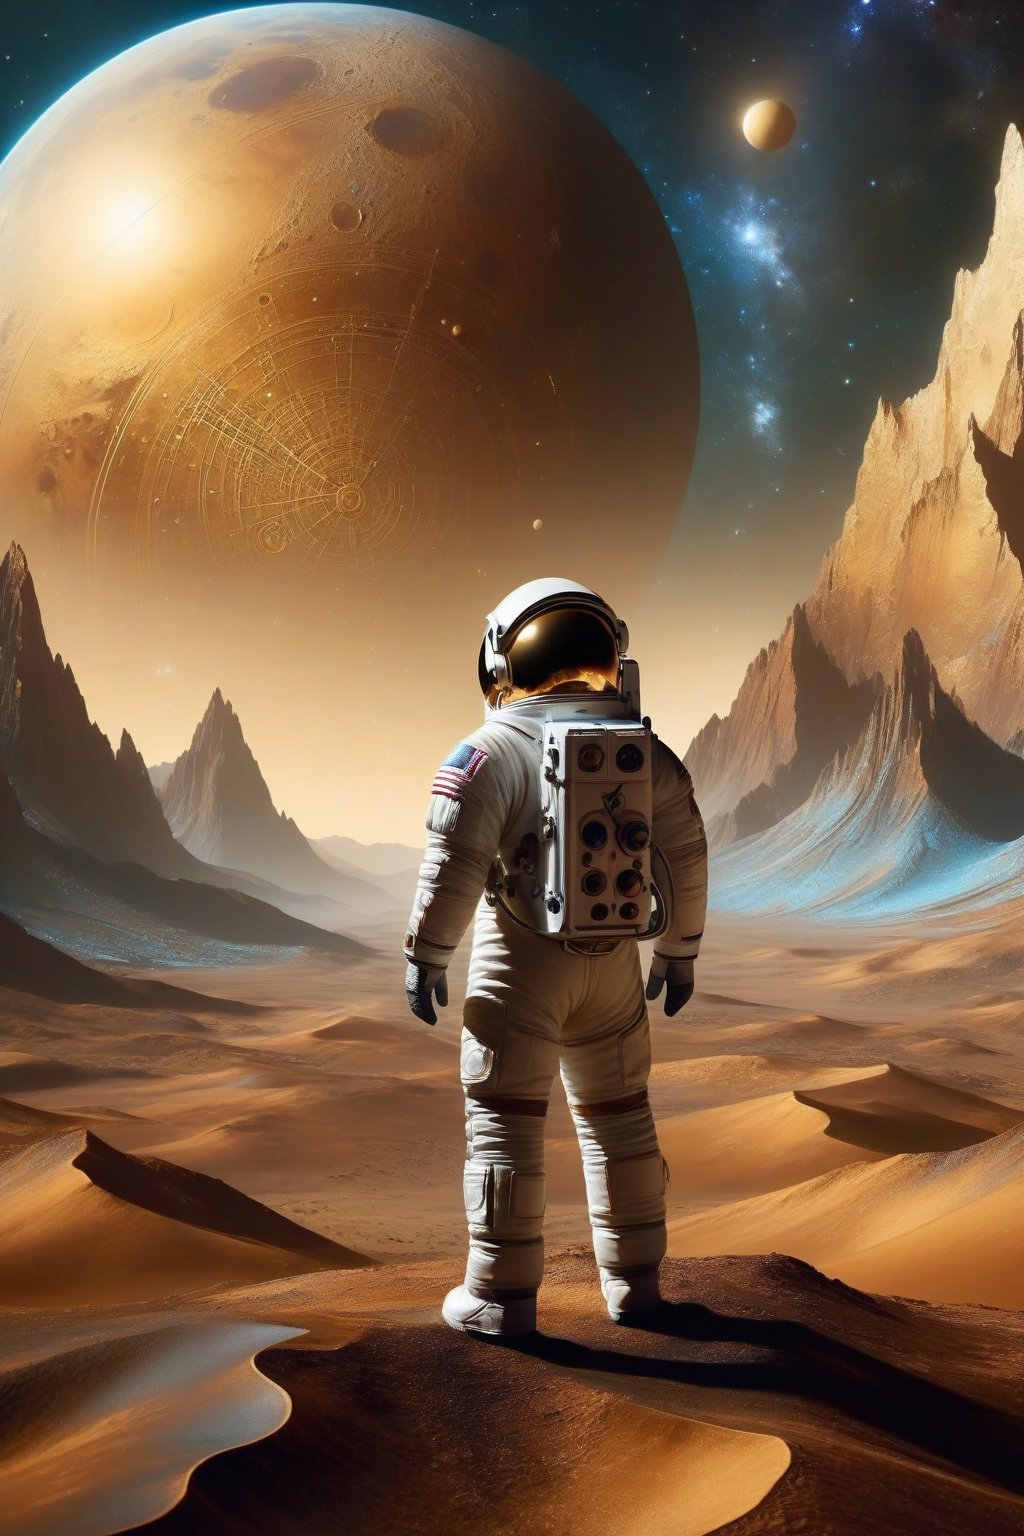 A Renaissance Lunar Landscape: An astronaut in period costume, with leather wings, walks gracefully across a lunar landscape painted in meticulous detail. The landscape is adorned with mountains reminiscent of Leonardo's compositions, with the Earth subtly glowing in the night sky. The deep crater resembles a mysterious depression and the iridescent crystal formations glow with an earthy, golden light. In the sky, a constellation shaped like a musical score intertwines with haloed stars in a celestial dance. The scene conveys a sense of harmony between science and art, capturing the essence of Renaissance exploration in a galactic context.,retro_rocket,futuristic, metal adorning,hollow inside,DonM0ccul7Ru57XL,tranzp,T-shirt design,illustration